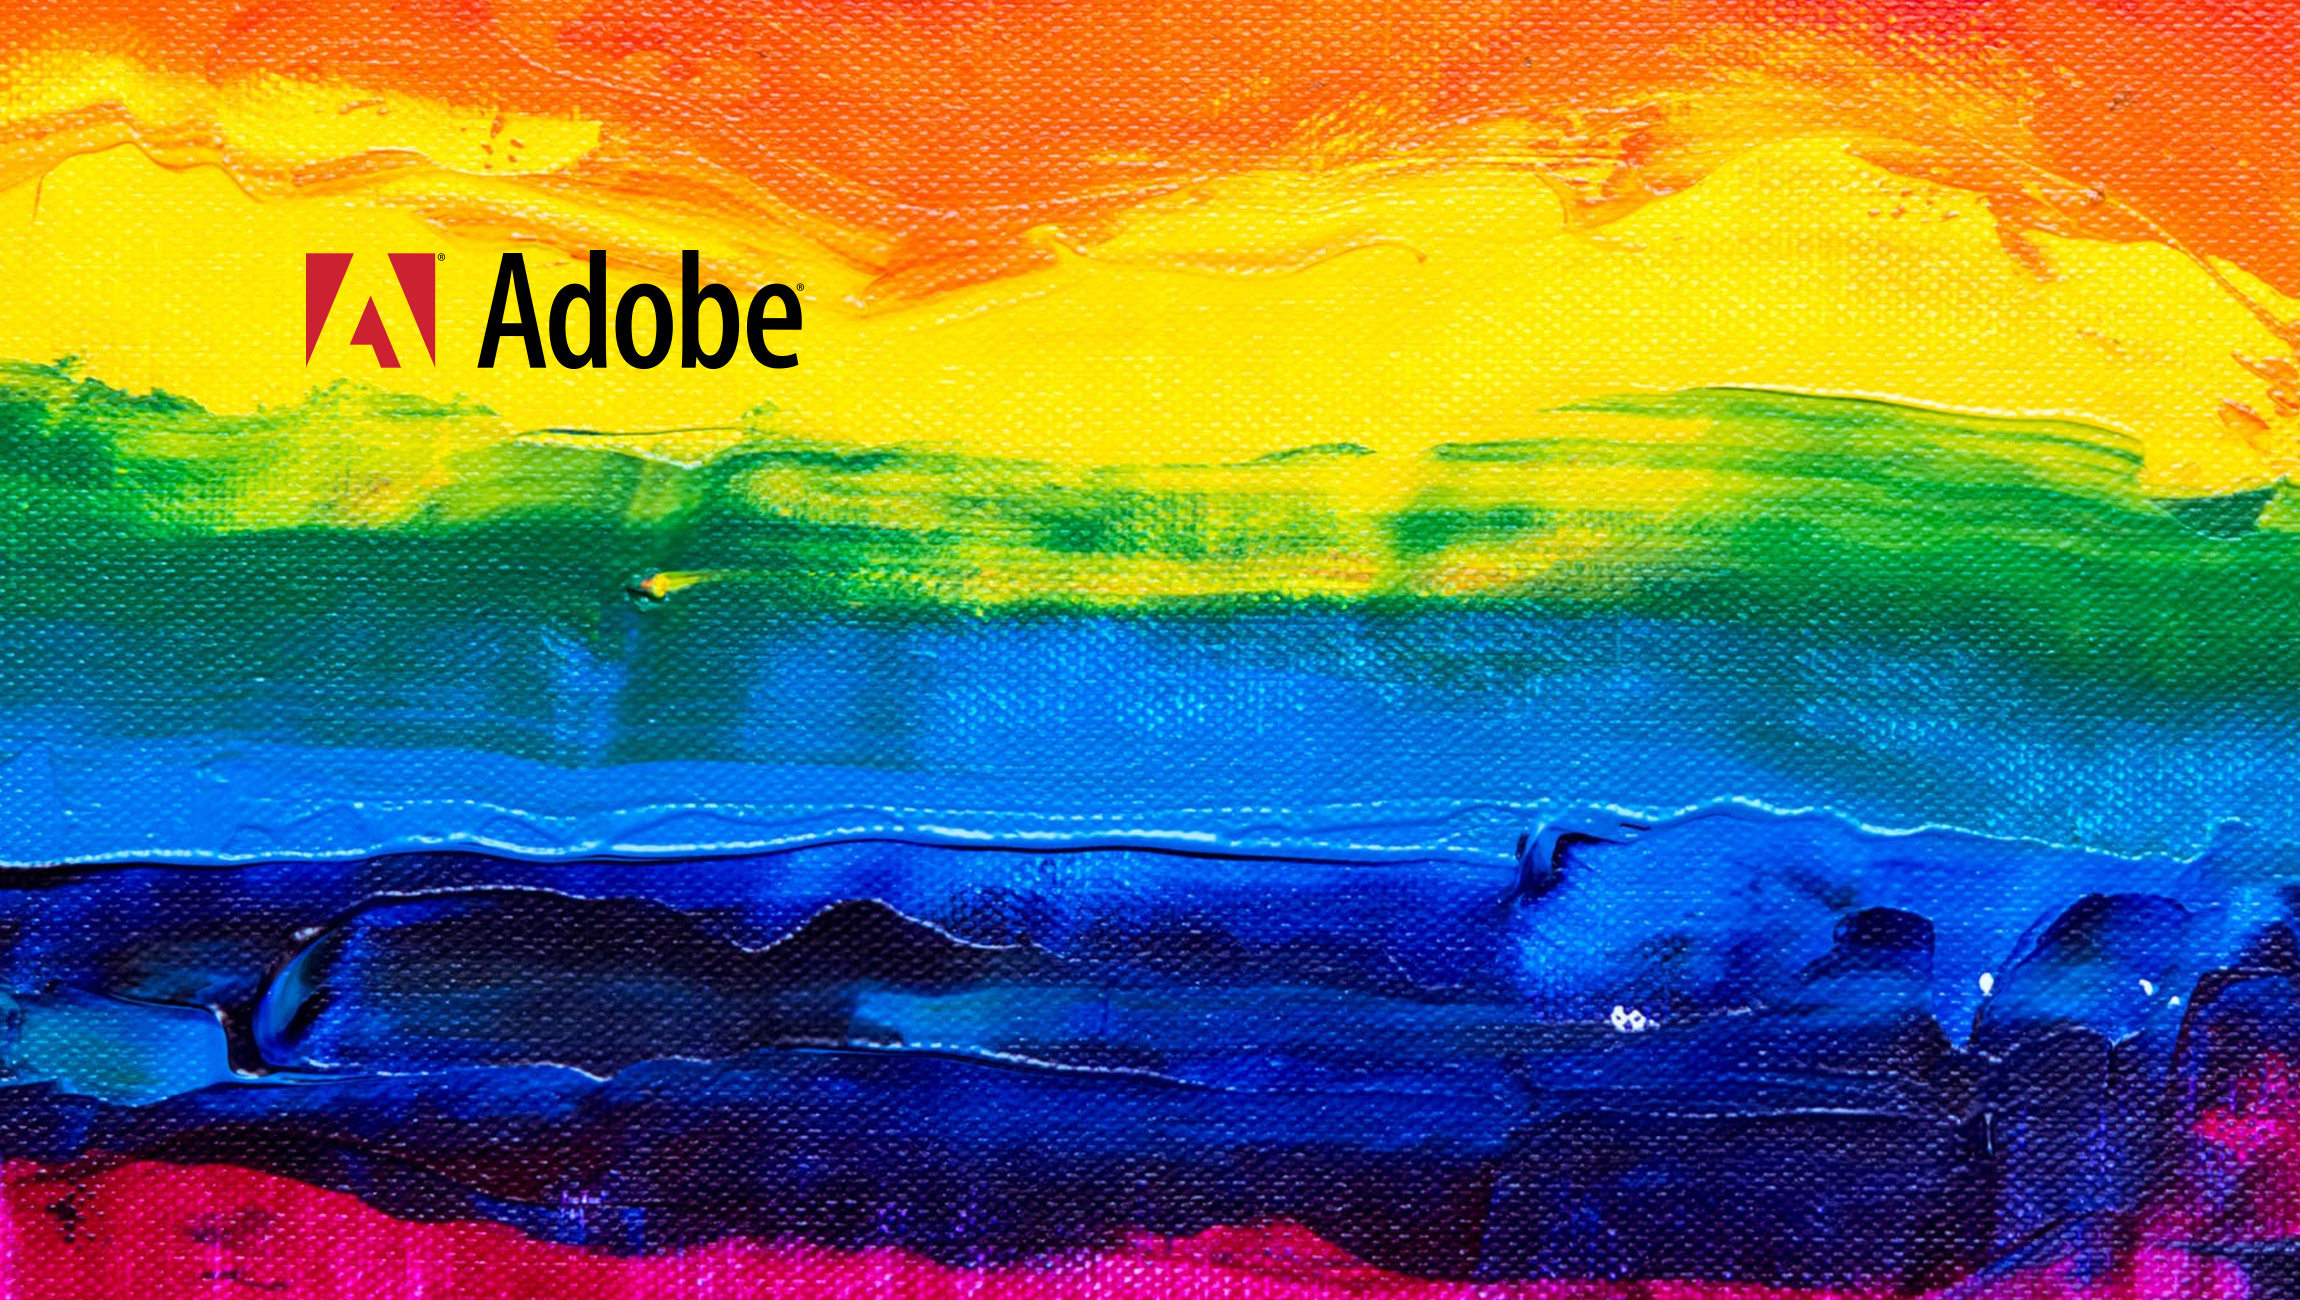 Adobe Expands Product Offerings to Meet Mid-Market and SMB Needs